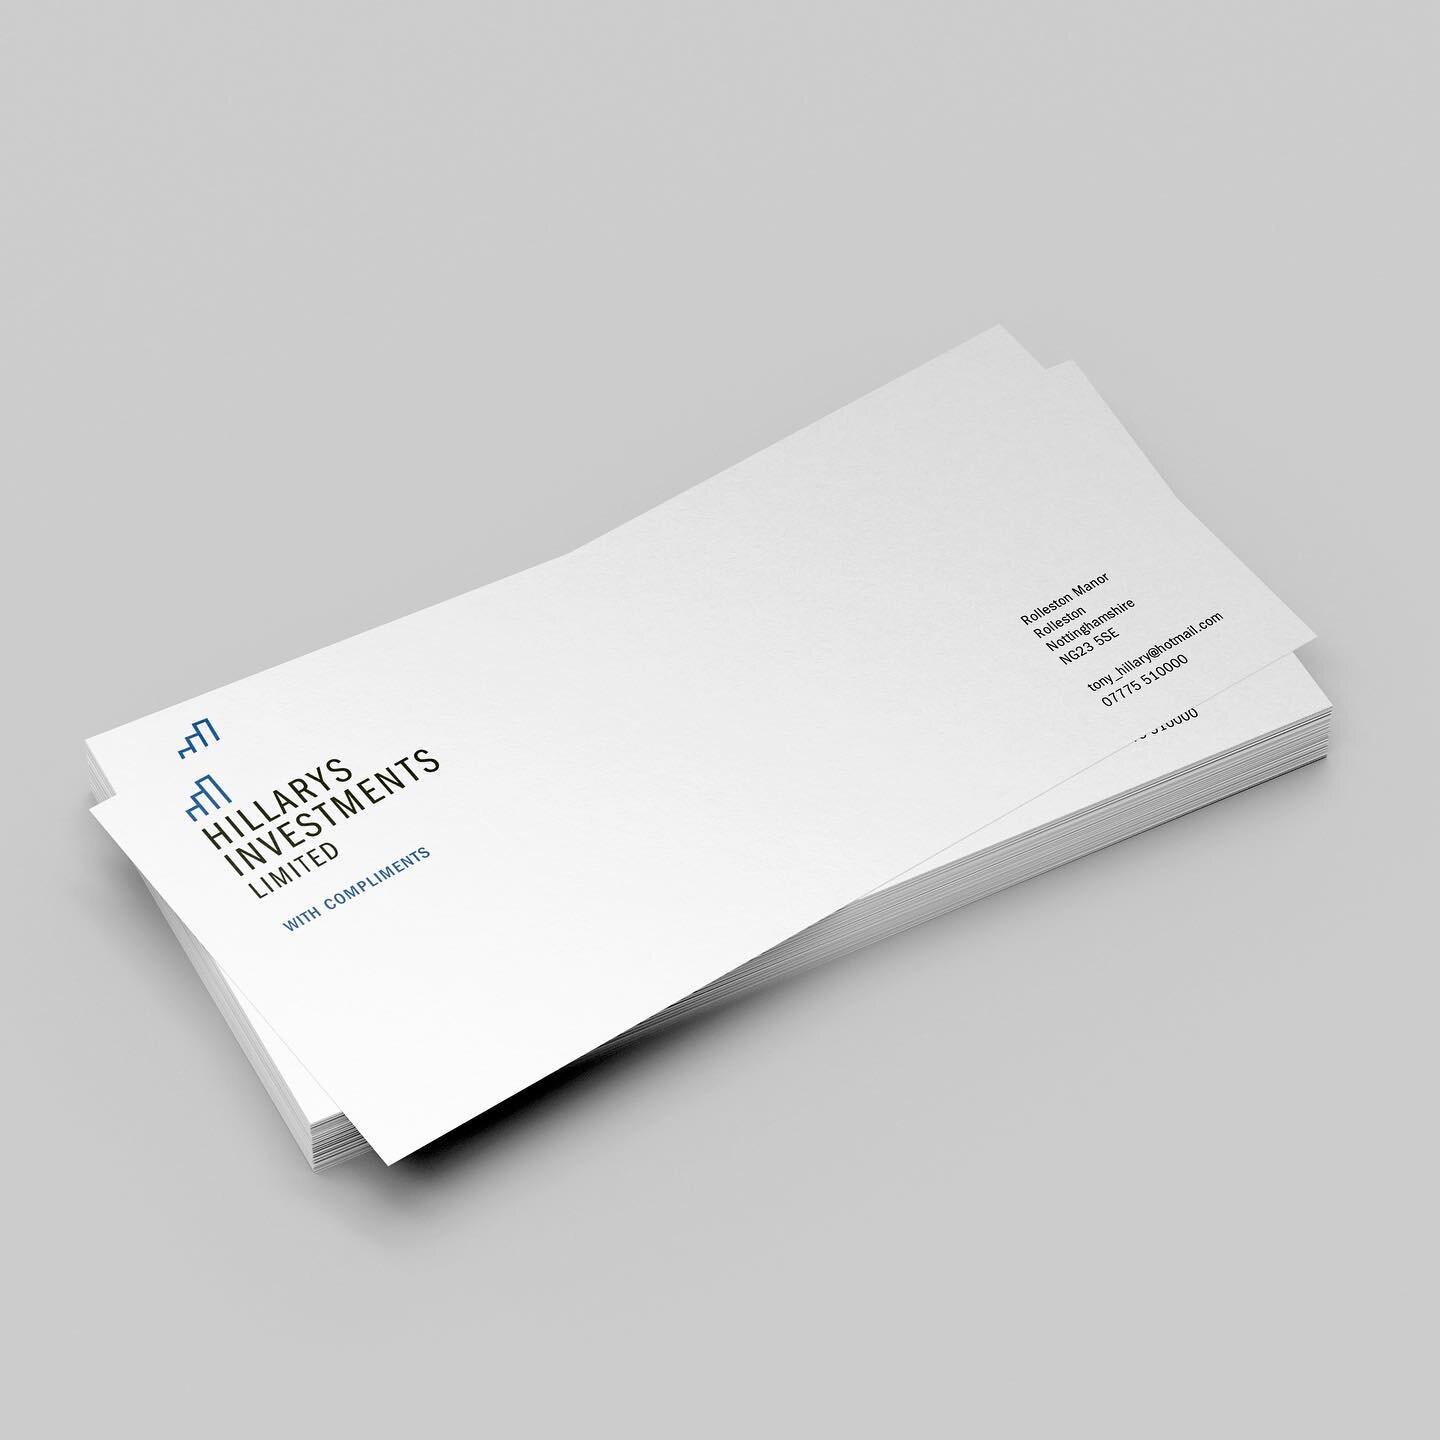 Compliment slips designed and supplied to Tony Hillary at Hillarys Investments.
.
.
.
.
.
#stationery #personalisedstationery #businessstationery #businessmaterials #stationerydesign #stationeryaddicts #businessowner #businesstips